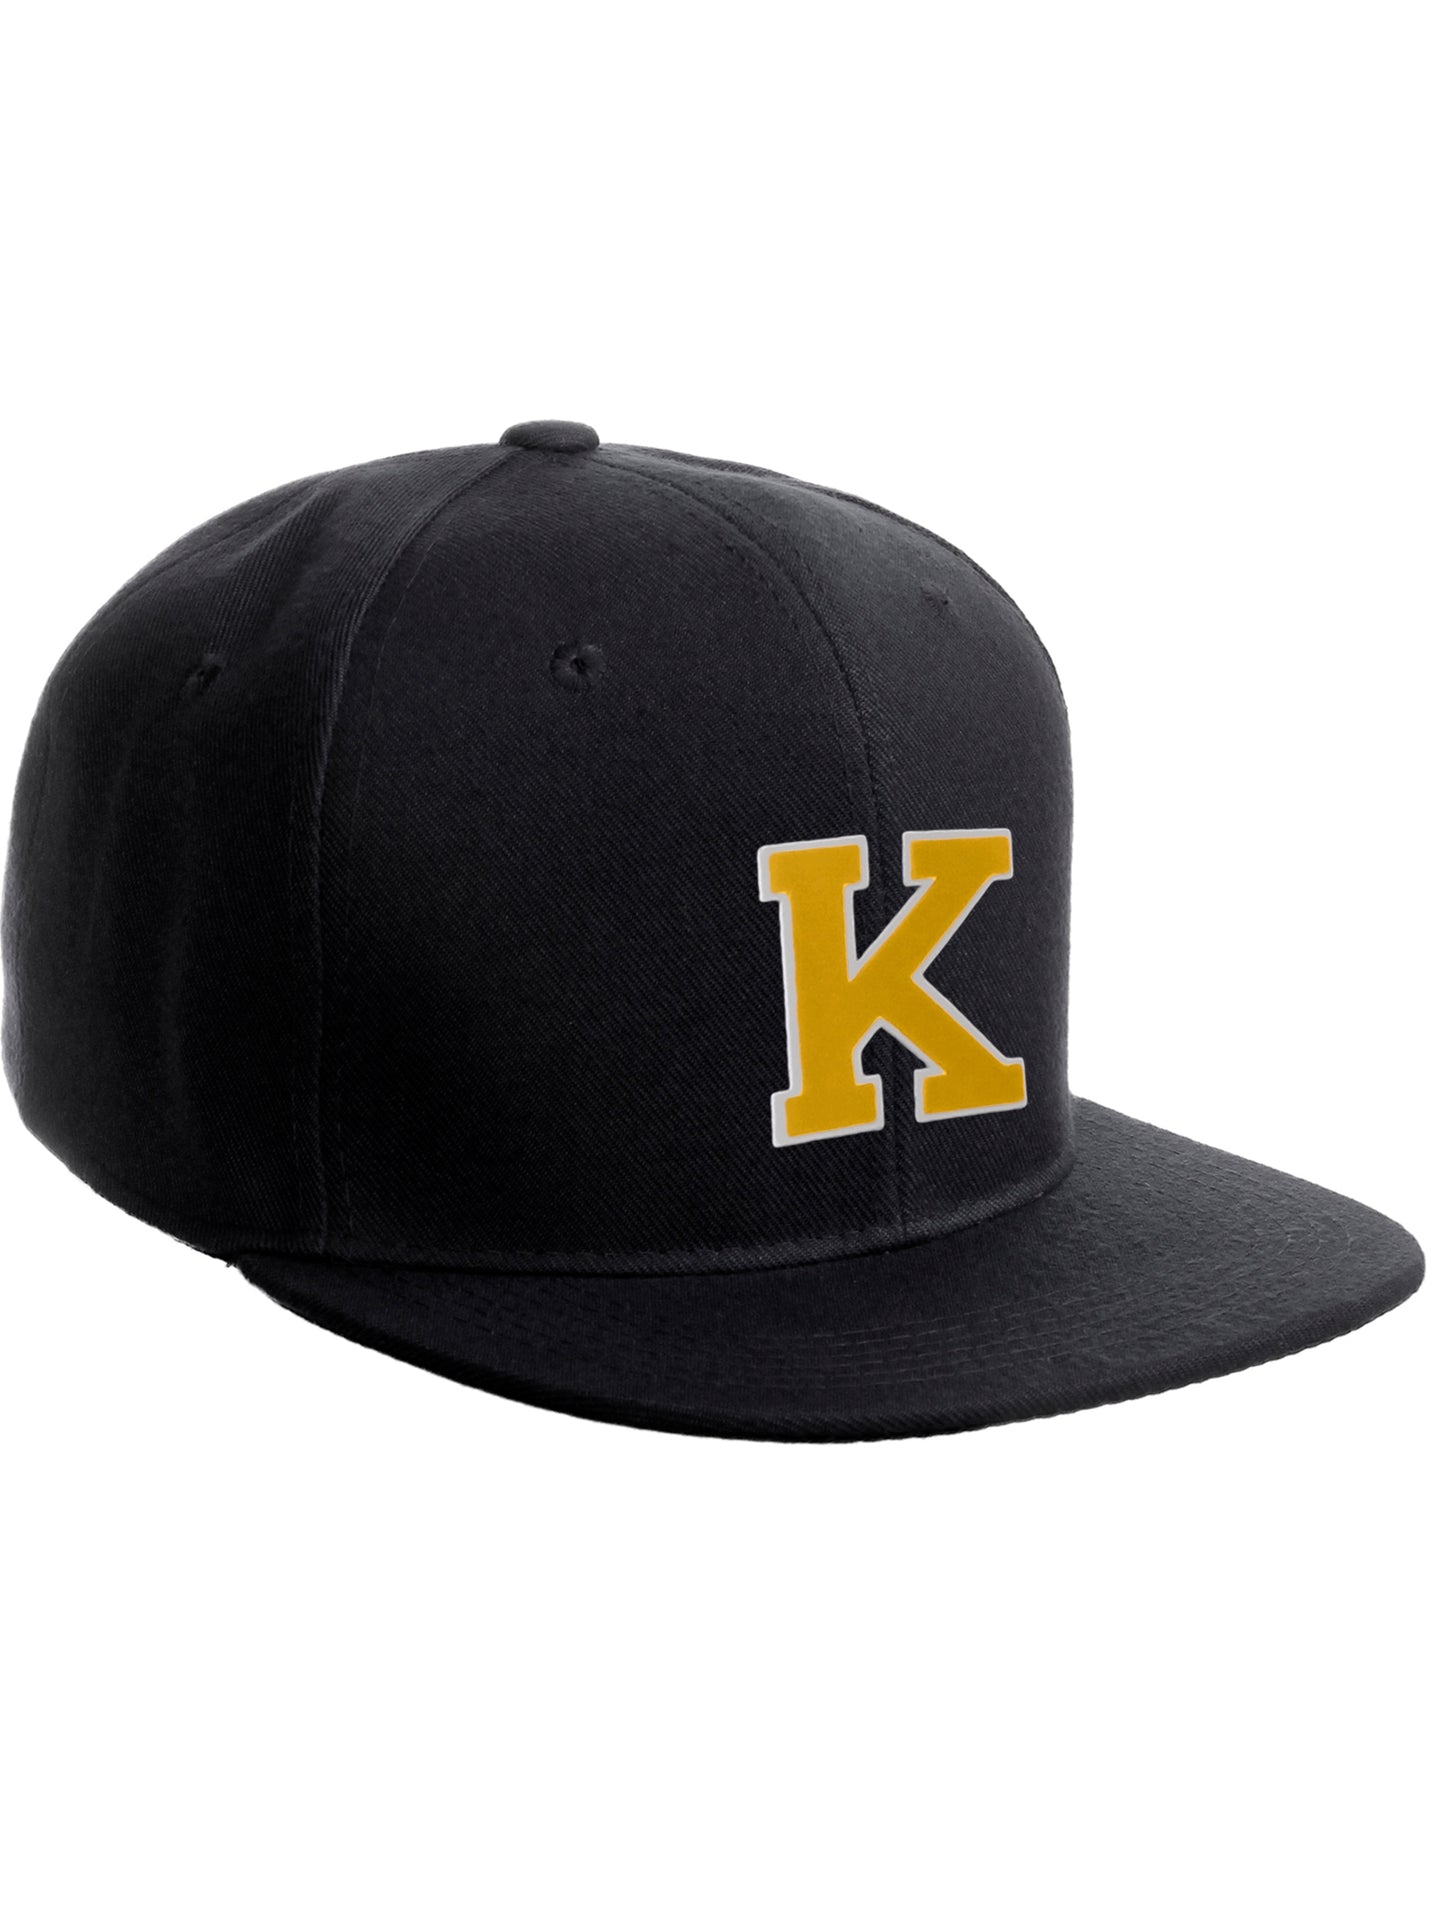 Classic Snapback Hat Custom A to Z Initial Raised Letters, Black Cap White Gold